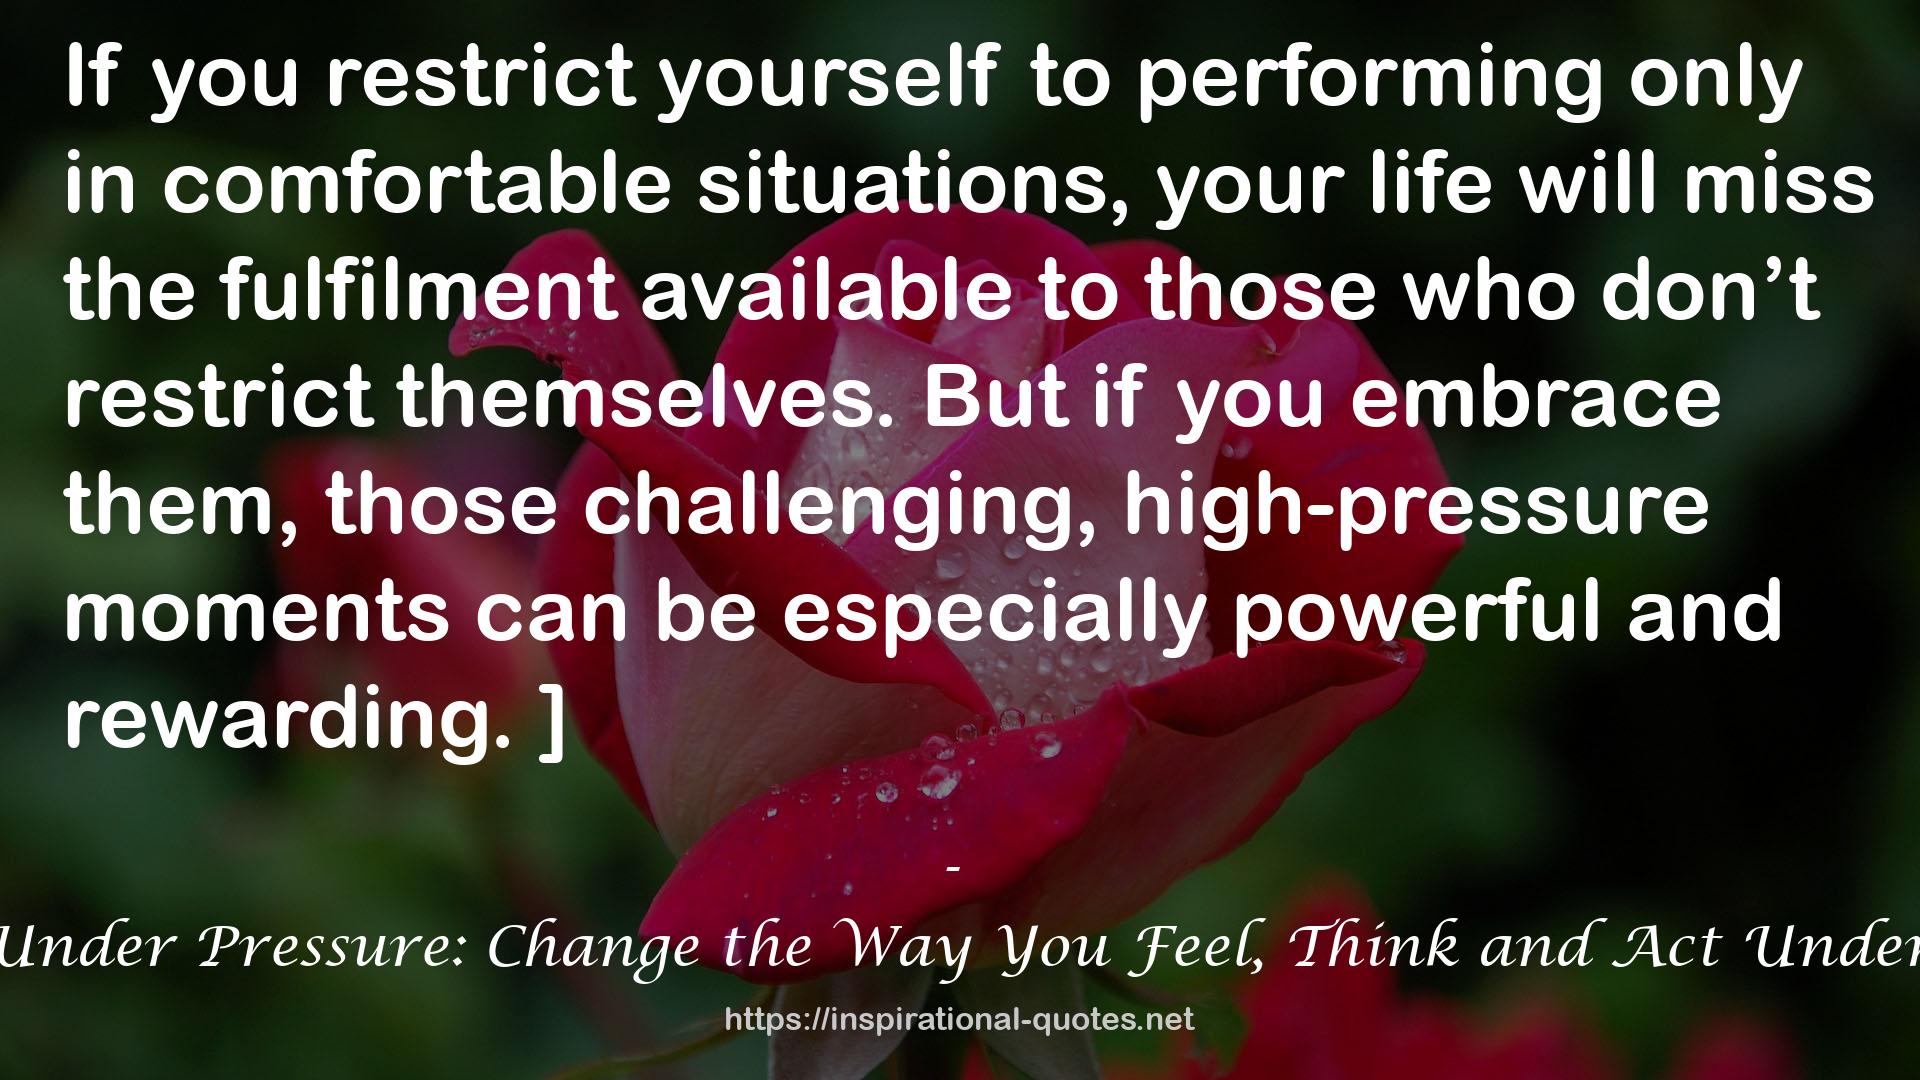 Perform Under Pressure: Change the Way You Feel, Think and Act Under Pressure QUOTES